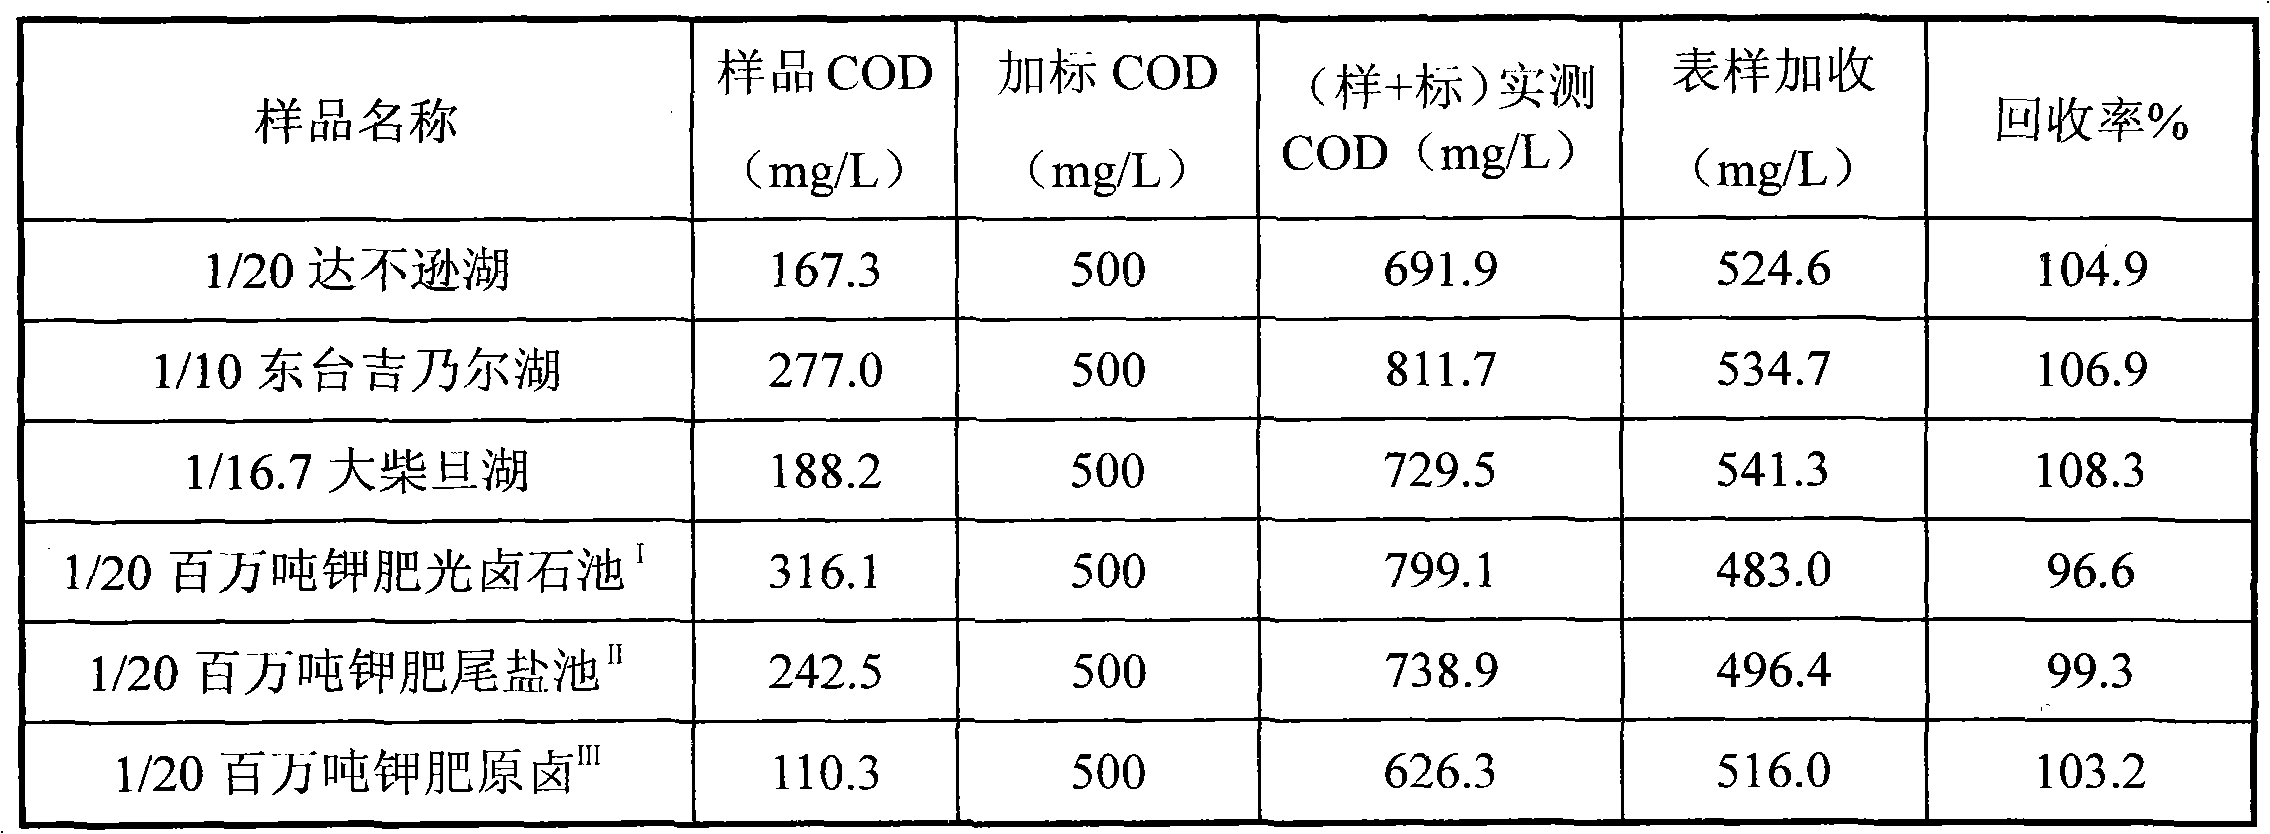 Chlorine Oxygen Consumption Curve Calibration-Sealed Digestion Method for Determination of Cod in High Chlorine Water